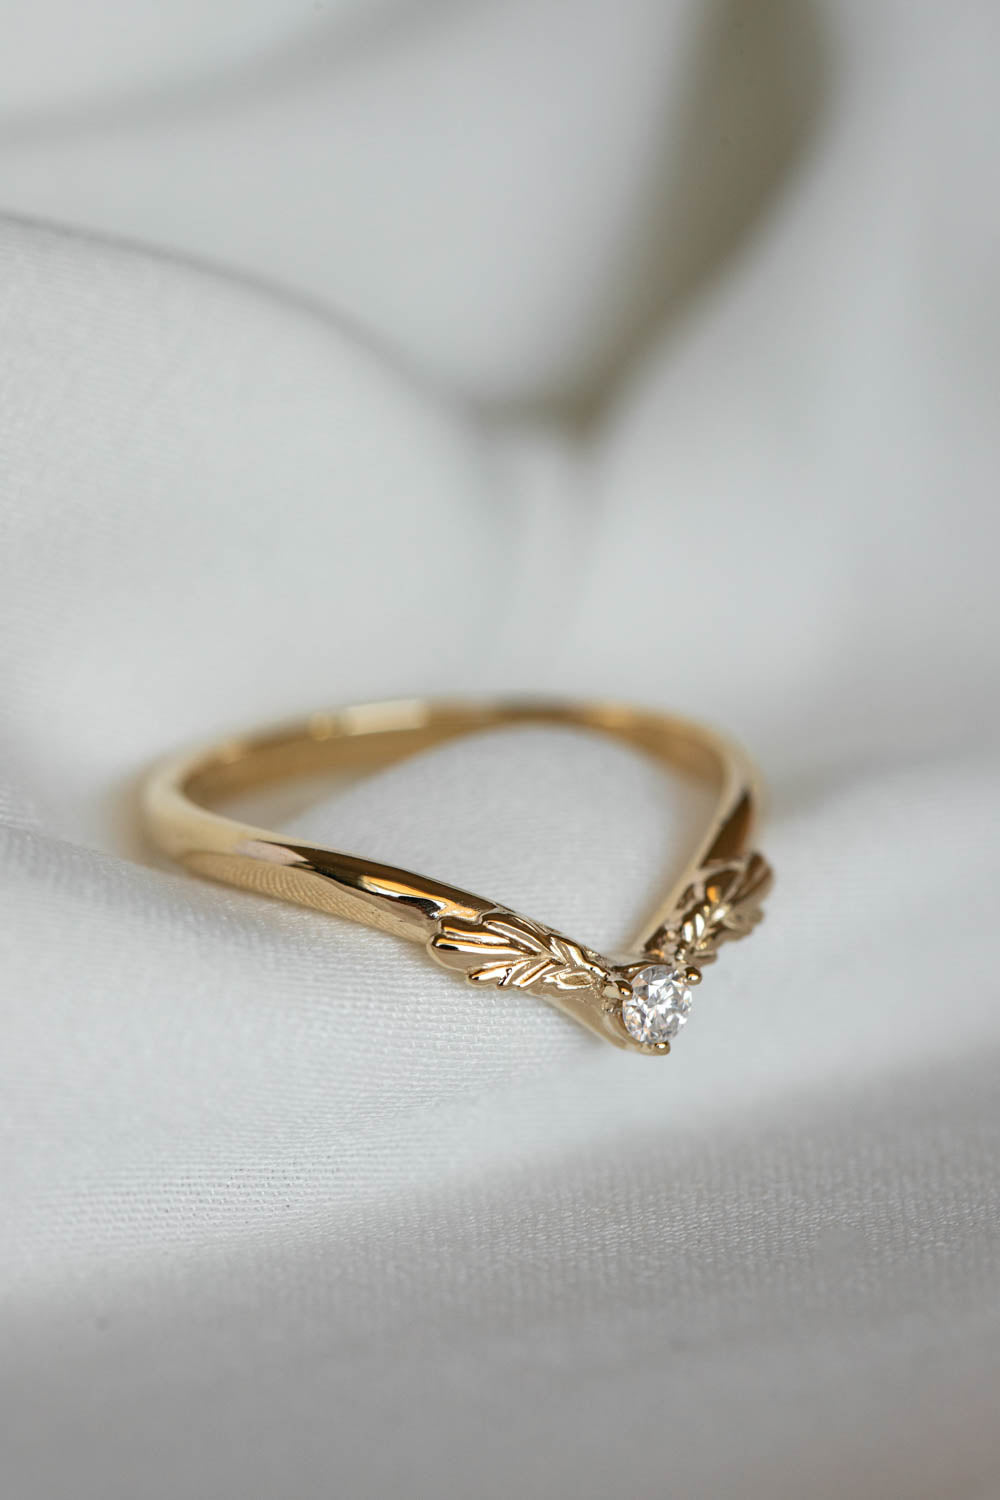 READY TO SHIP: Leaf wedding band in 14K yellow gold, moissanite, RING SIZE 7 US - Eden Garden Jewelry™